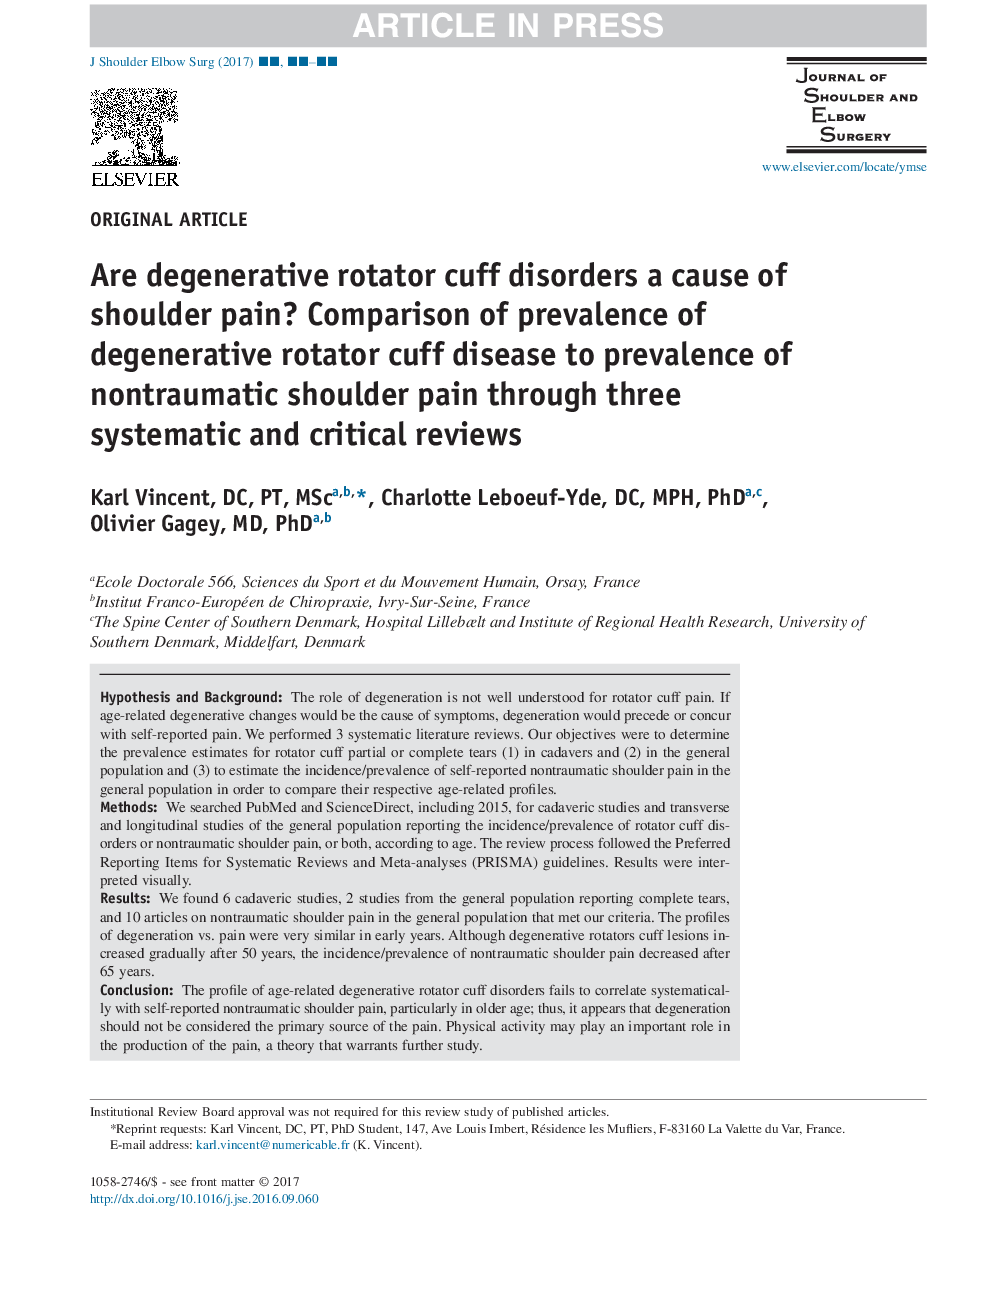 Are degenerative rotator cuff disorders a cause of shoulder pain? Comparison of prevalence of degenerative rotator cuff disease to prevalence of nontraumatic shoulder pain through three systematic and critical reviews